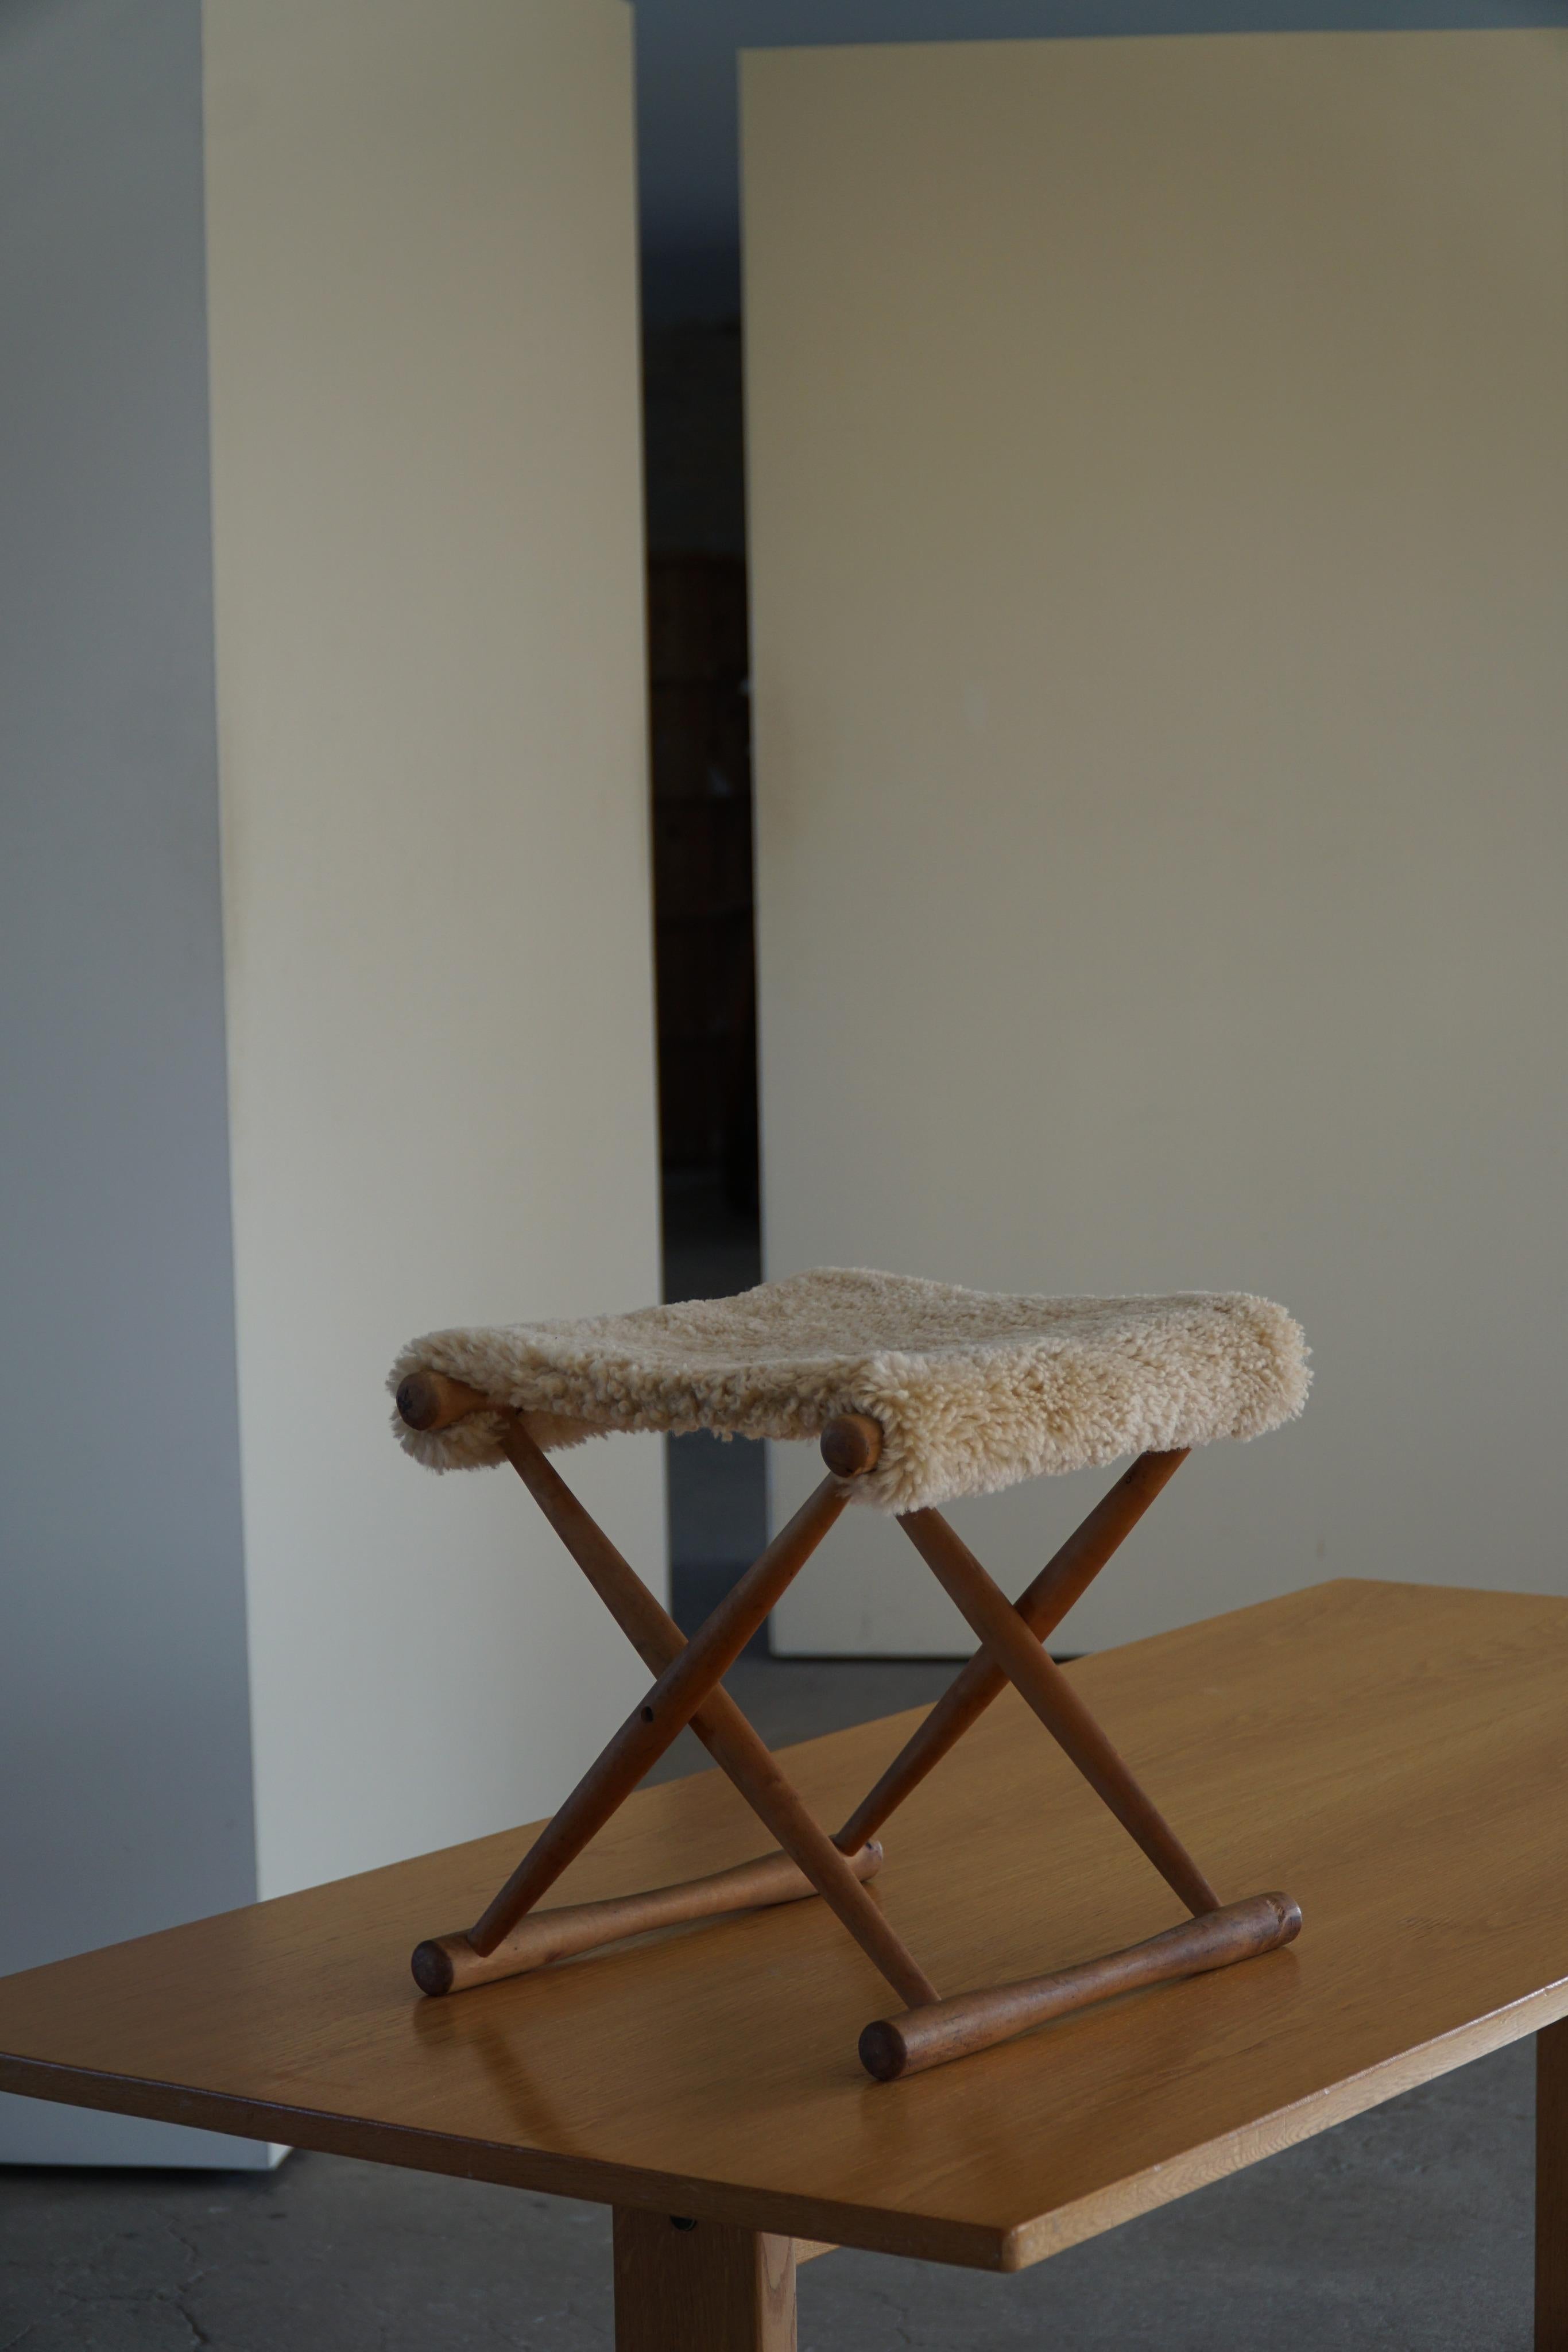 Foldable stool in solid beech, reupholstered seat in great quality shearling sheepskin. Made by an unknown Danish Cabinetmaker in the 1950s. 

A great object for the Scandinavian interior home. The overall impression is really good.

With a